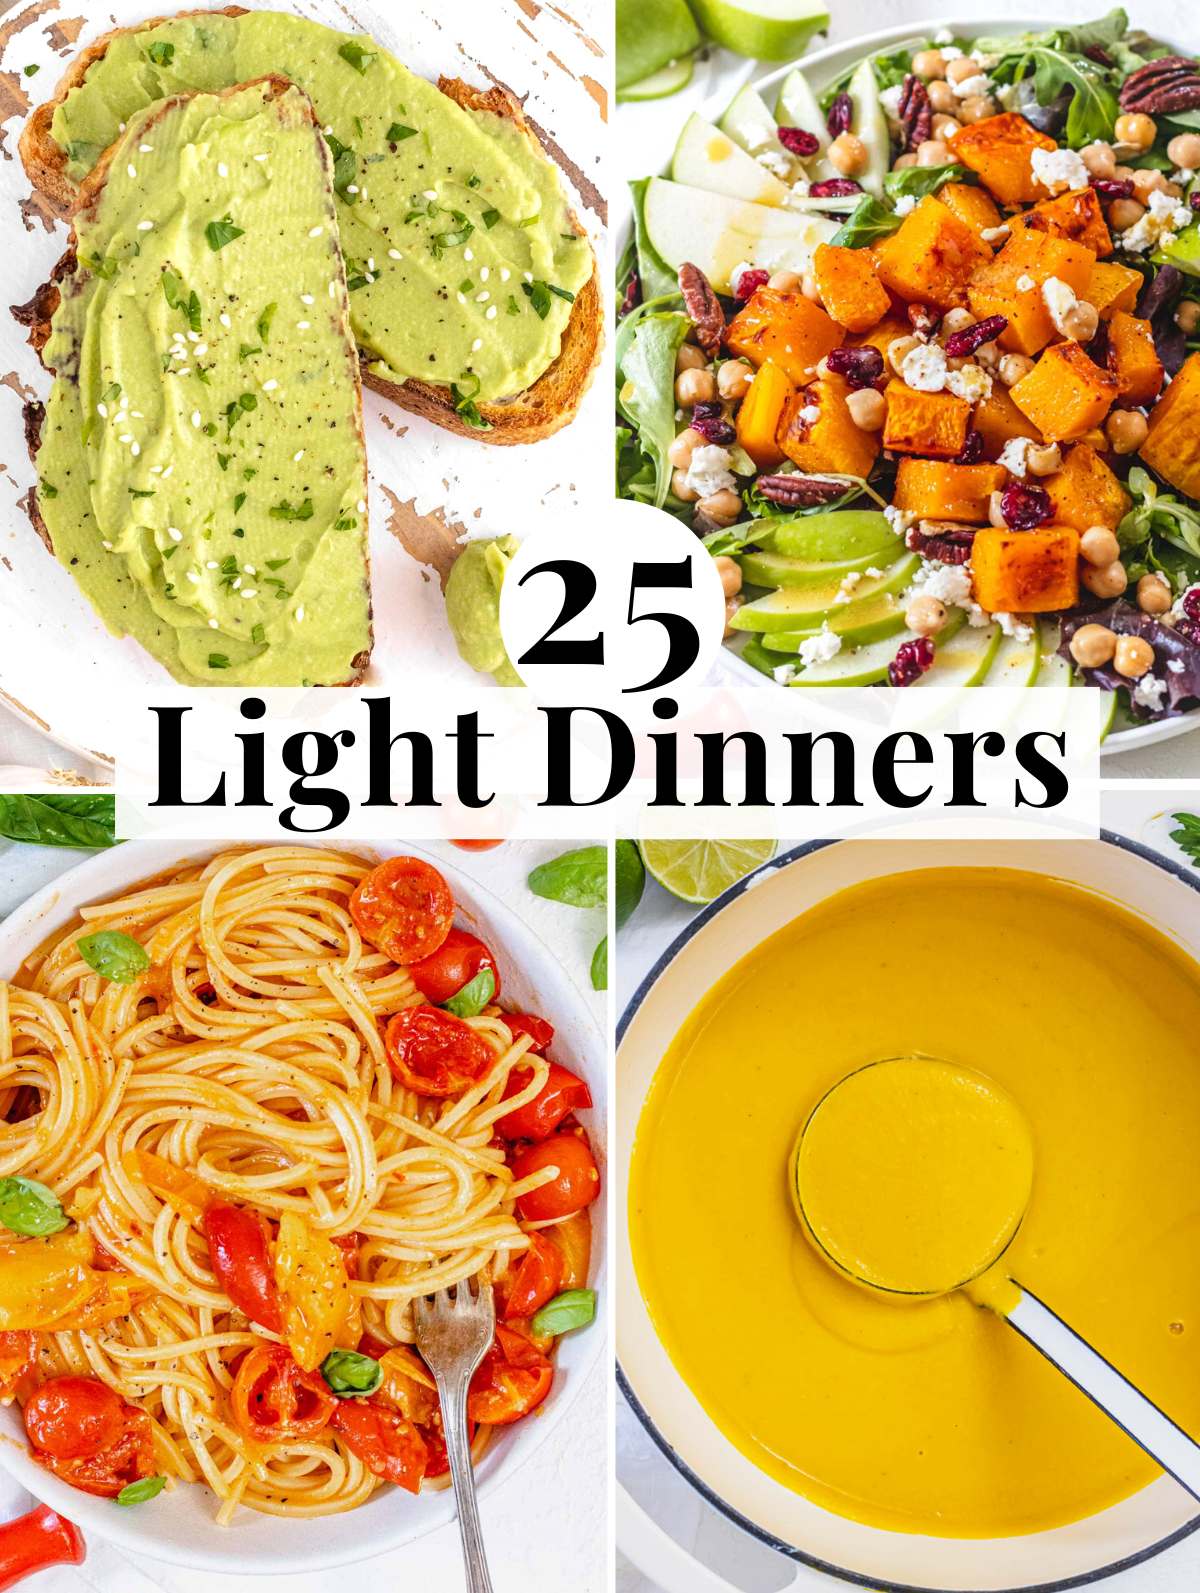 Light Dinner Ideas with soups, sandwiches and pasta